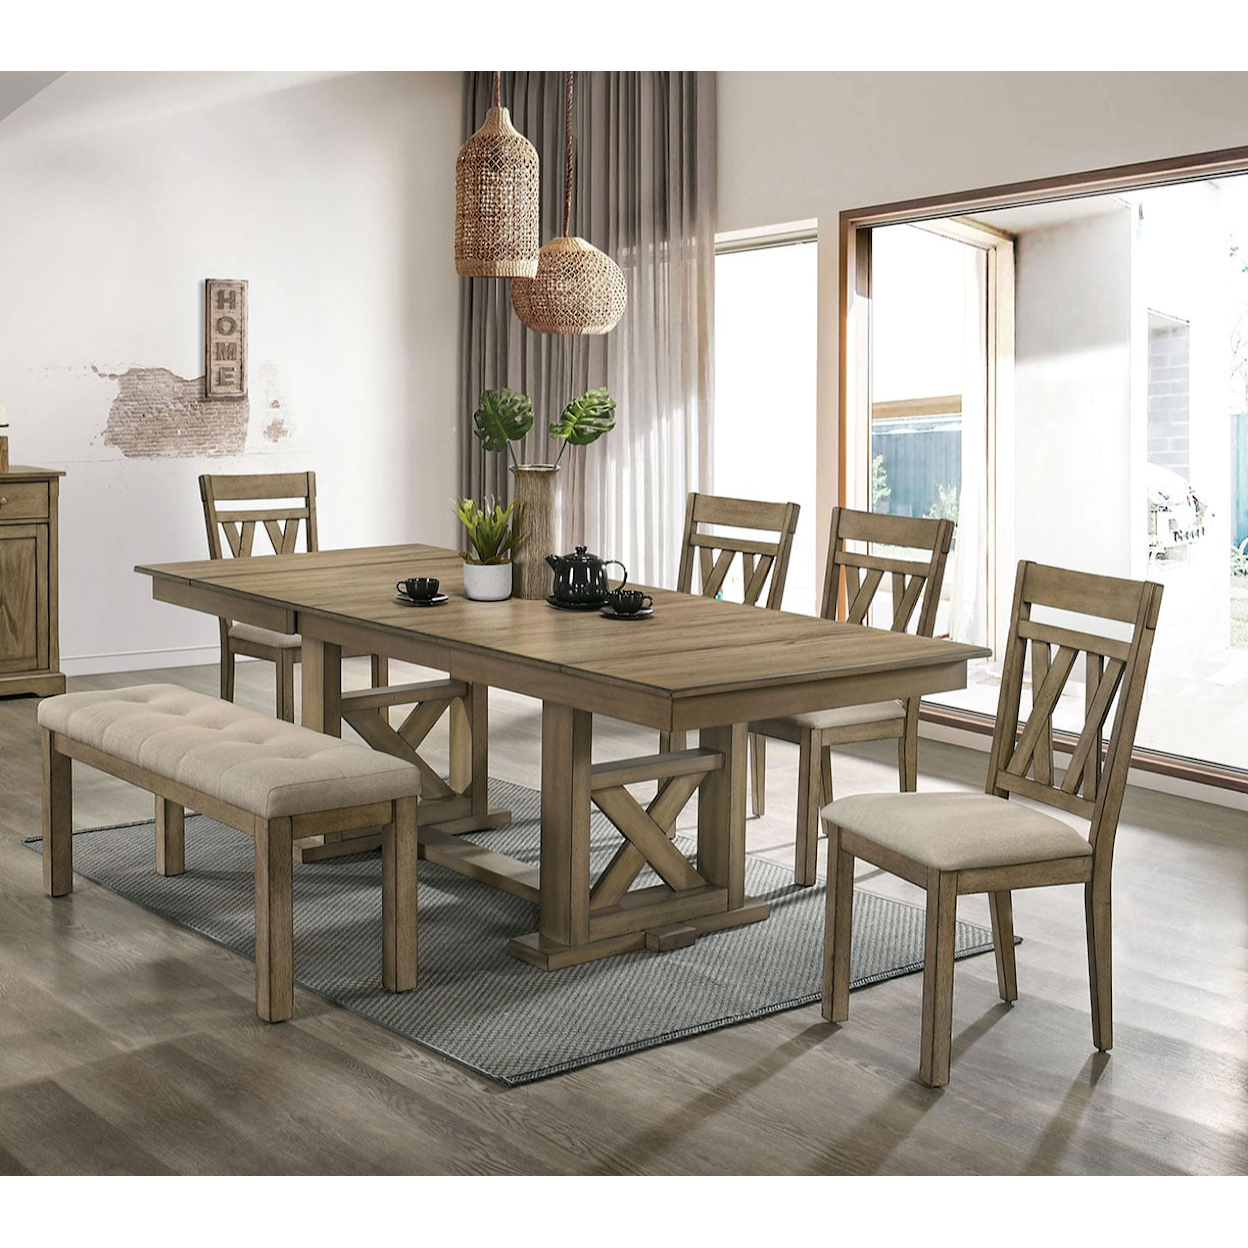 Furniture of America TEMPLEMORE 6-Piece Dining Set w/ Bench